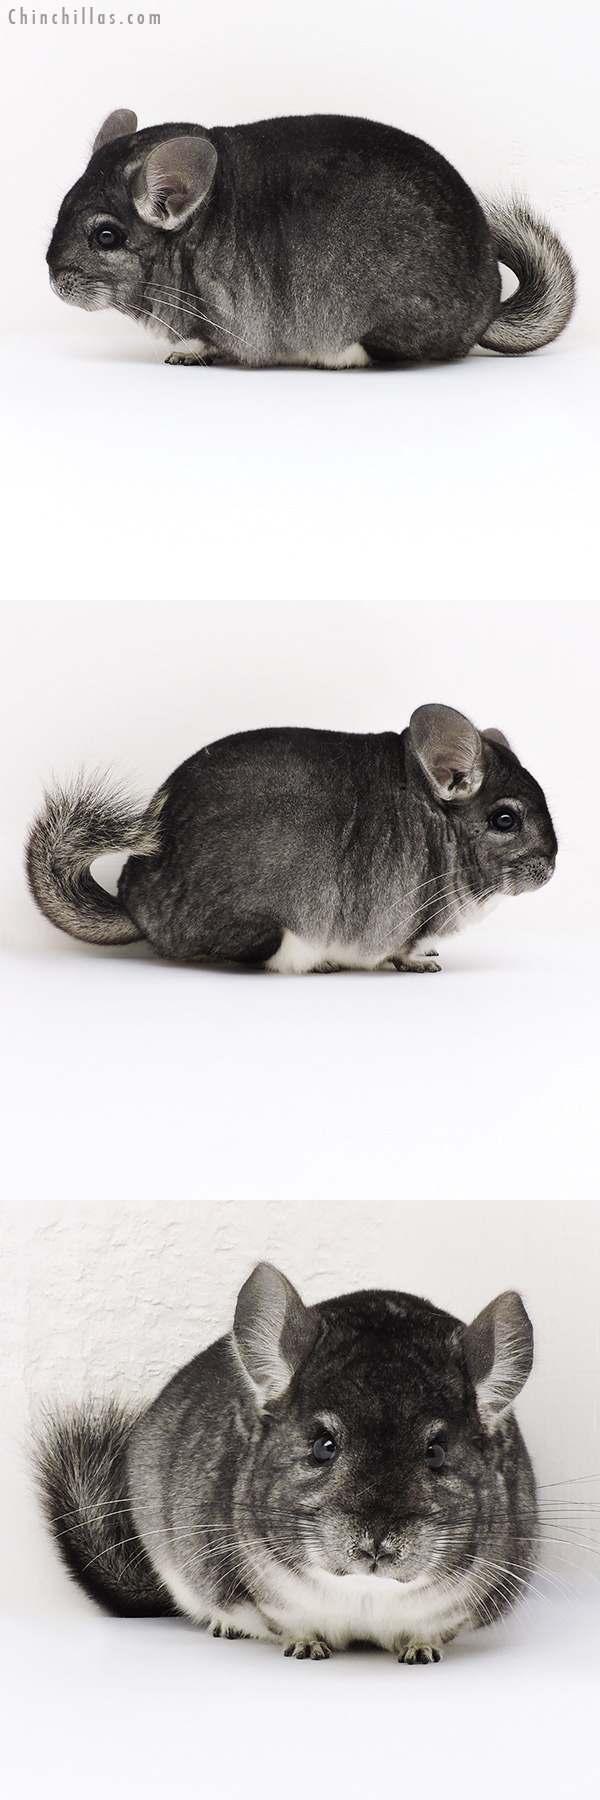 Chinchilla or related item offered for sale or export on Chinchillas.com - 17197 Large Blocky Premium Production Quality Standard Female Chinchilla